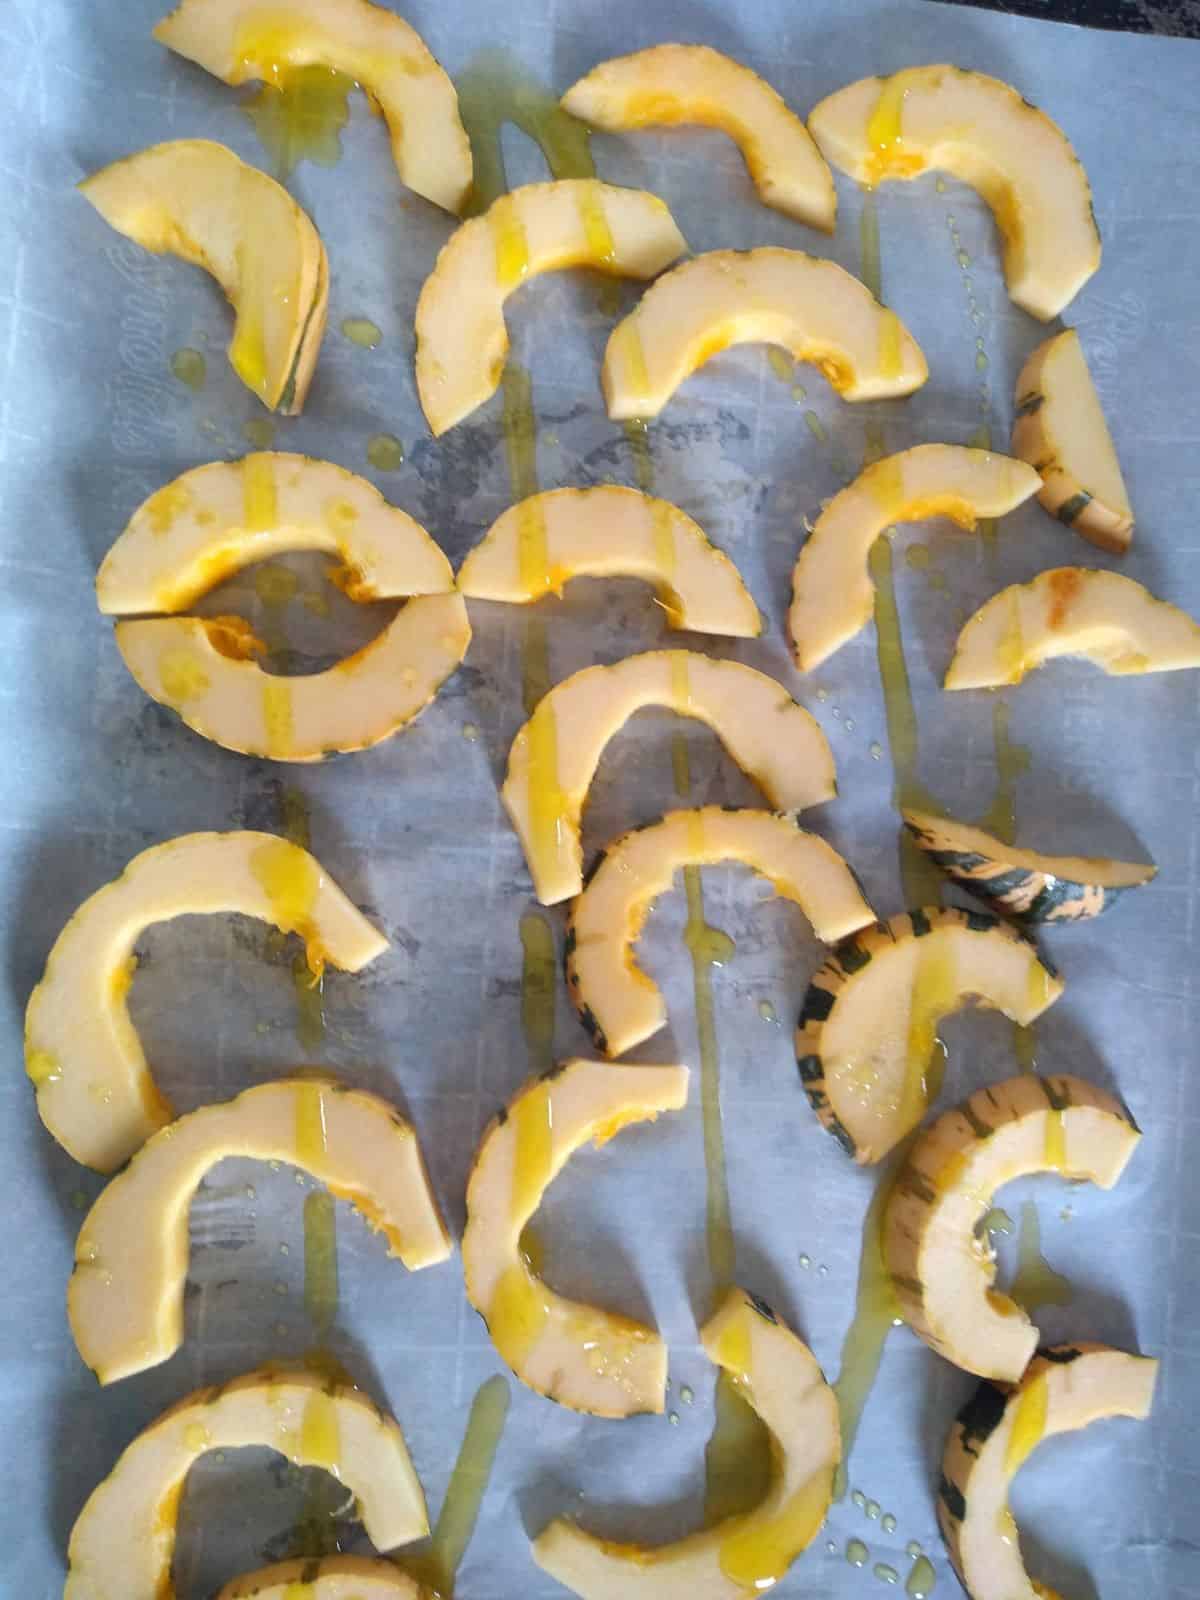 Half moon shaped Delicata squash on top of a parchment paper with olive oil drizzled on top.